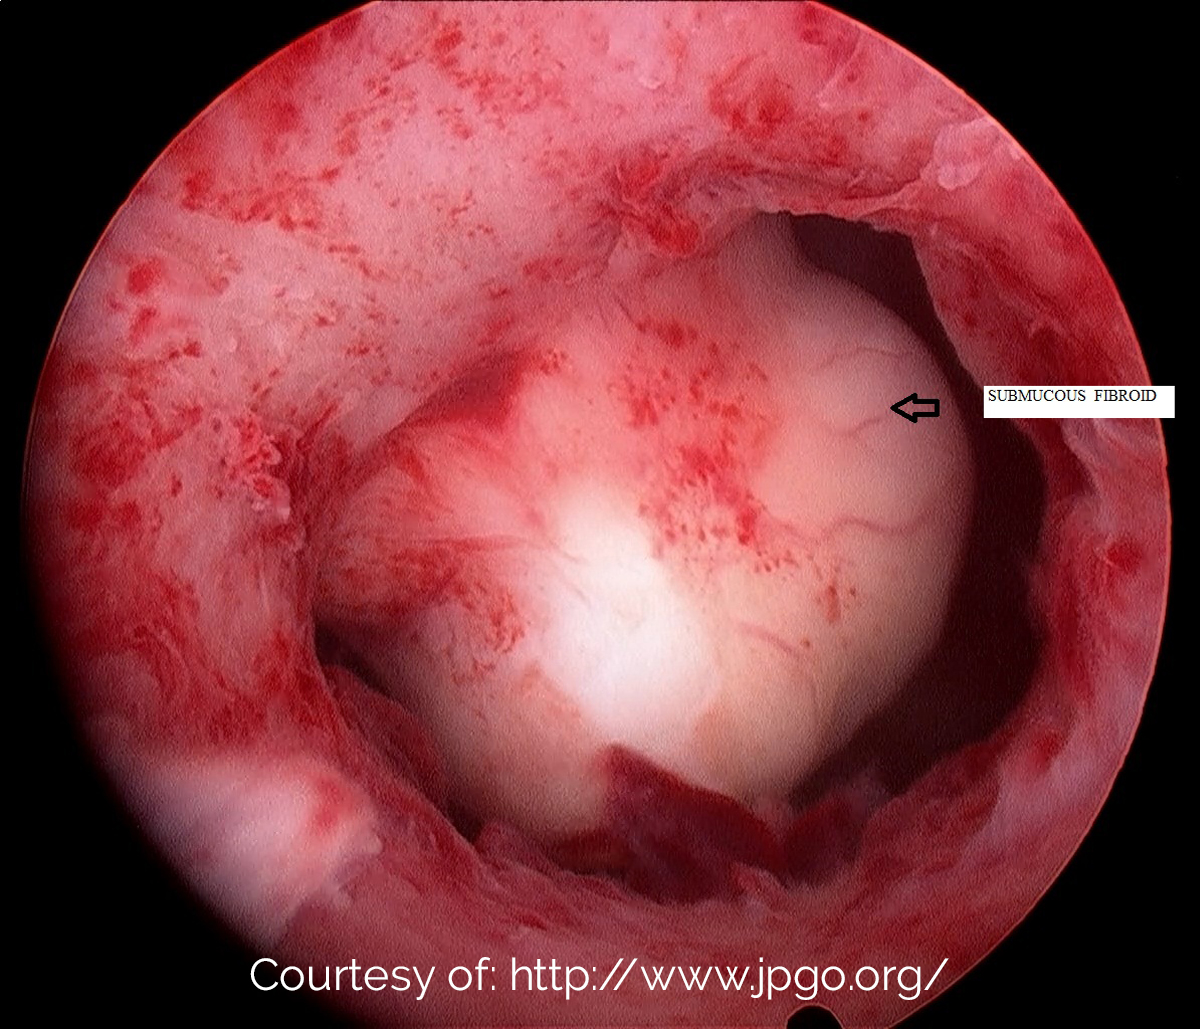 Submucosal fibroid seen at a hysteroscope